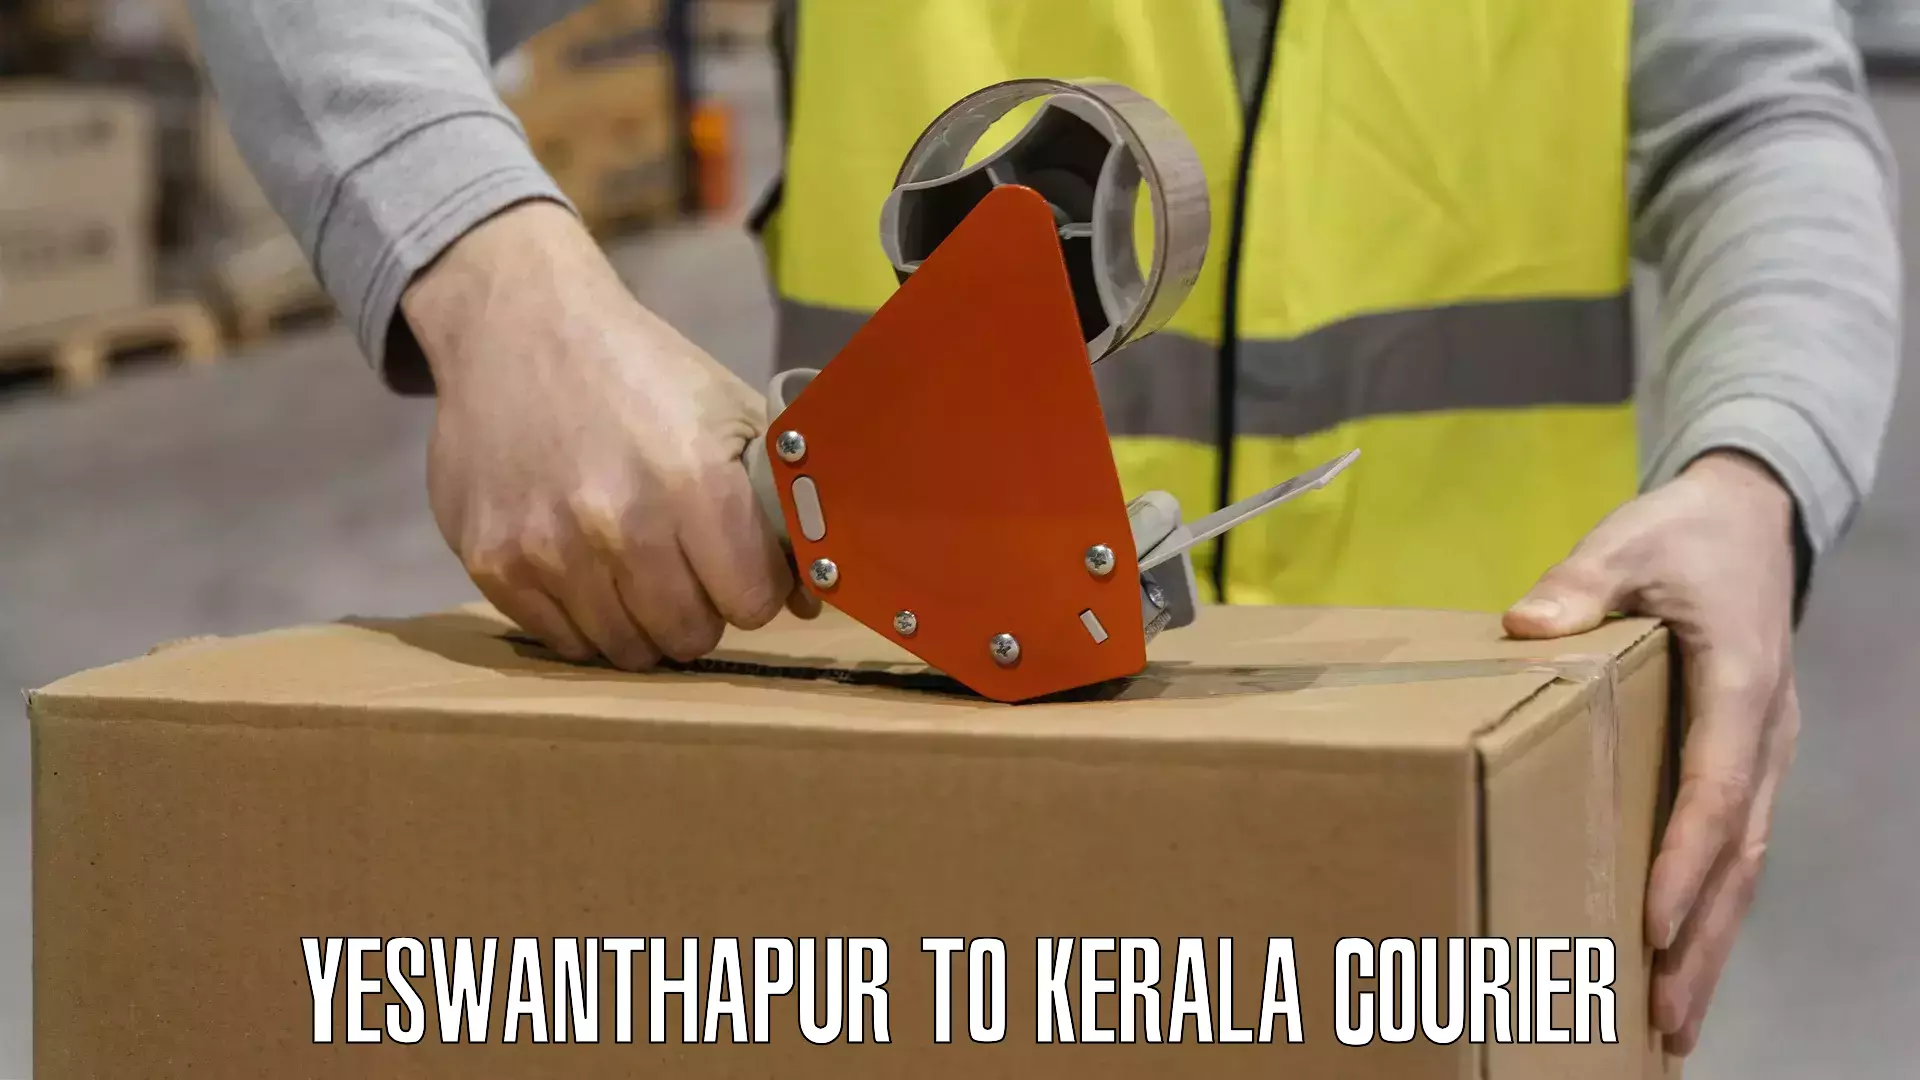 Enhanced shipping experience Yeswanthapur to Kerala